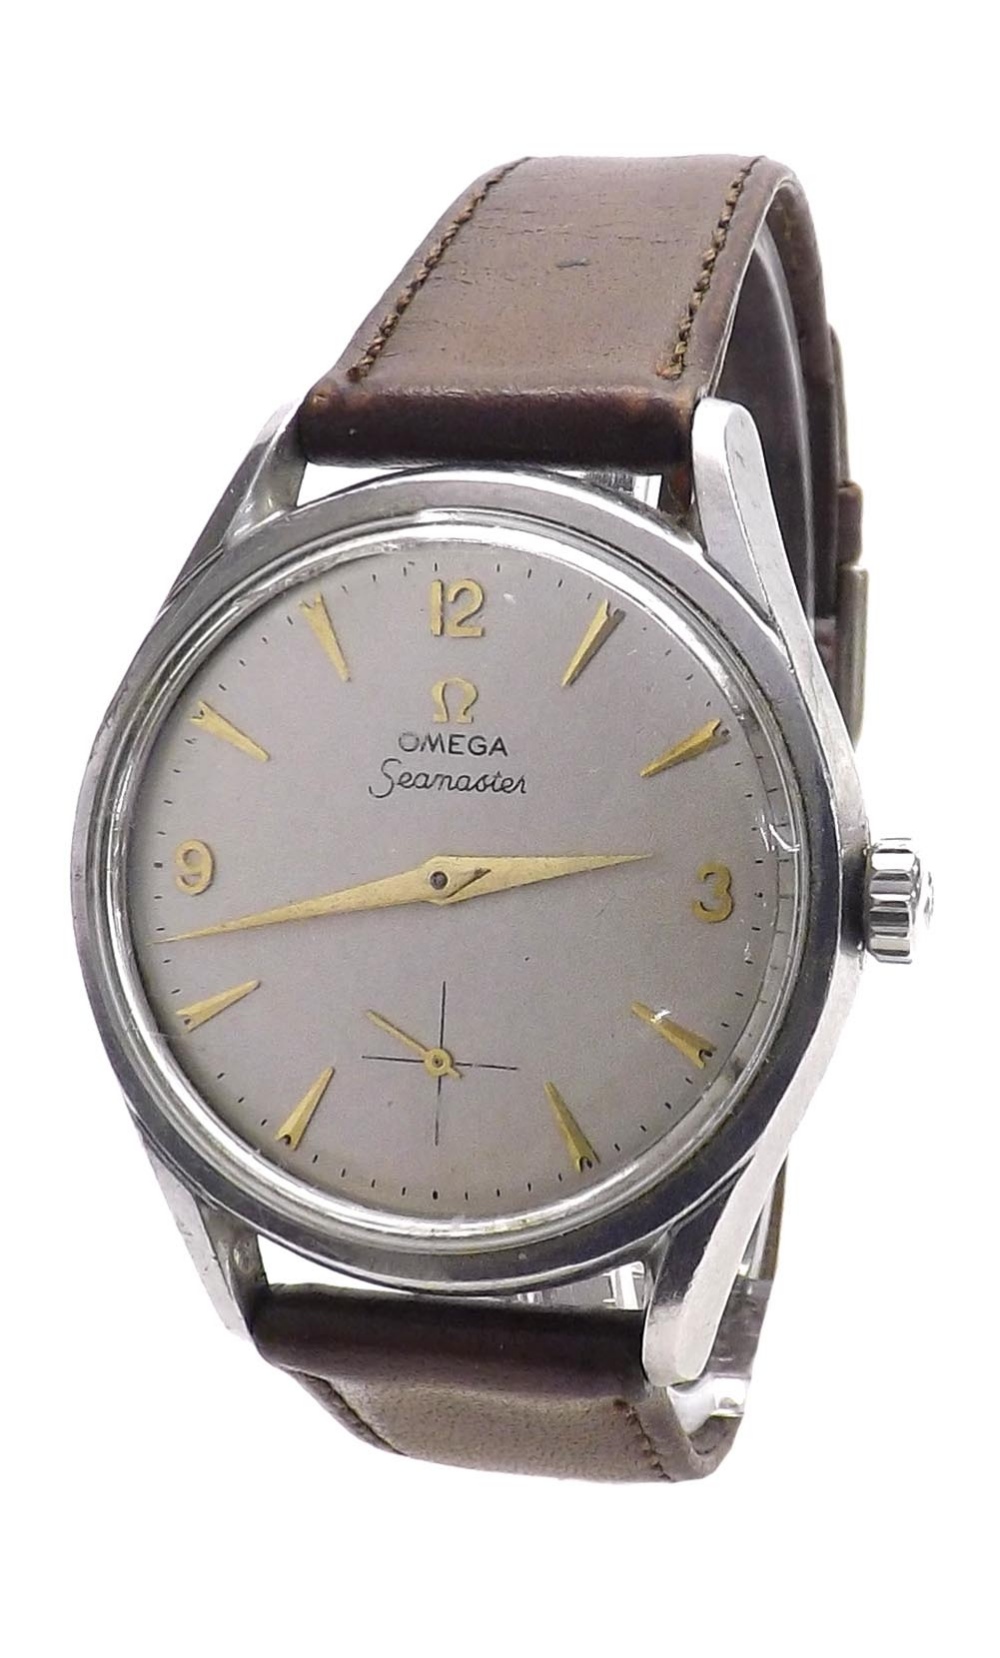 Omega Seamaster stainless steel gentleman's wristwatch, circa 1956, the silvered dial with Arabic